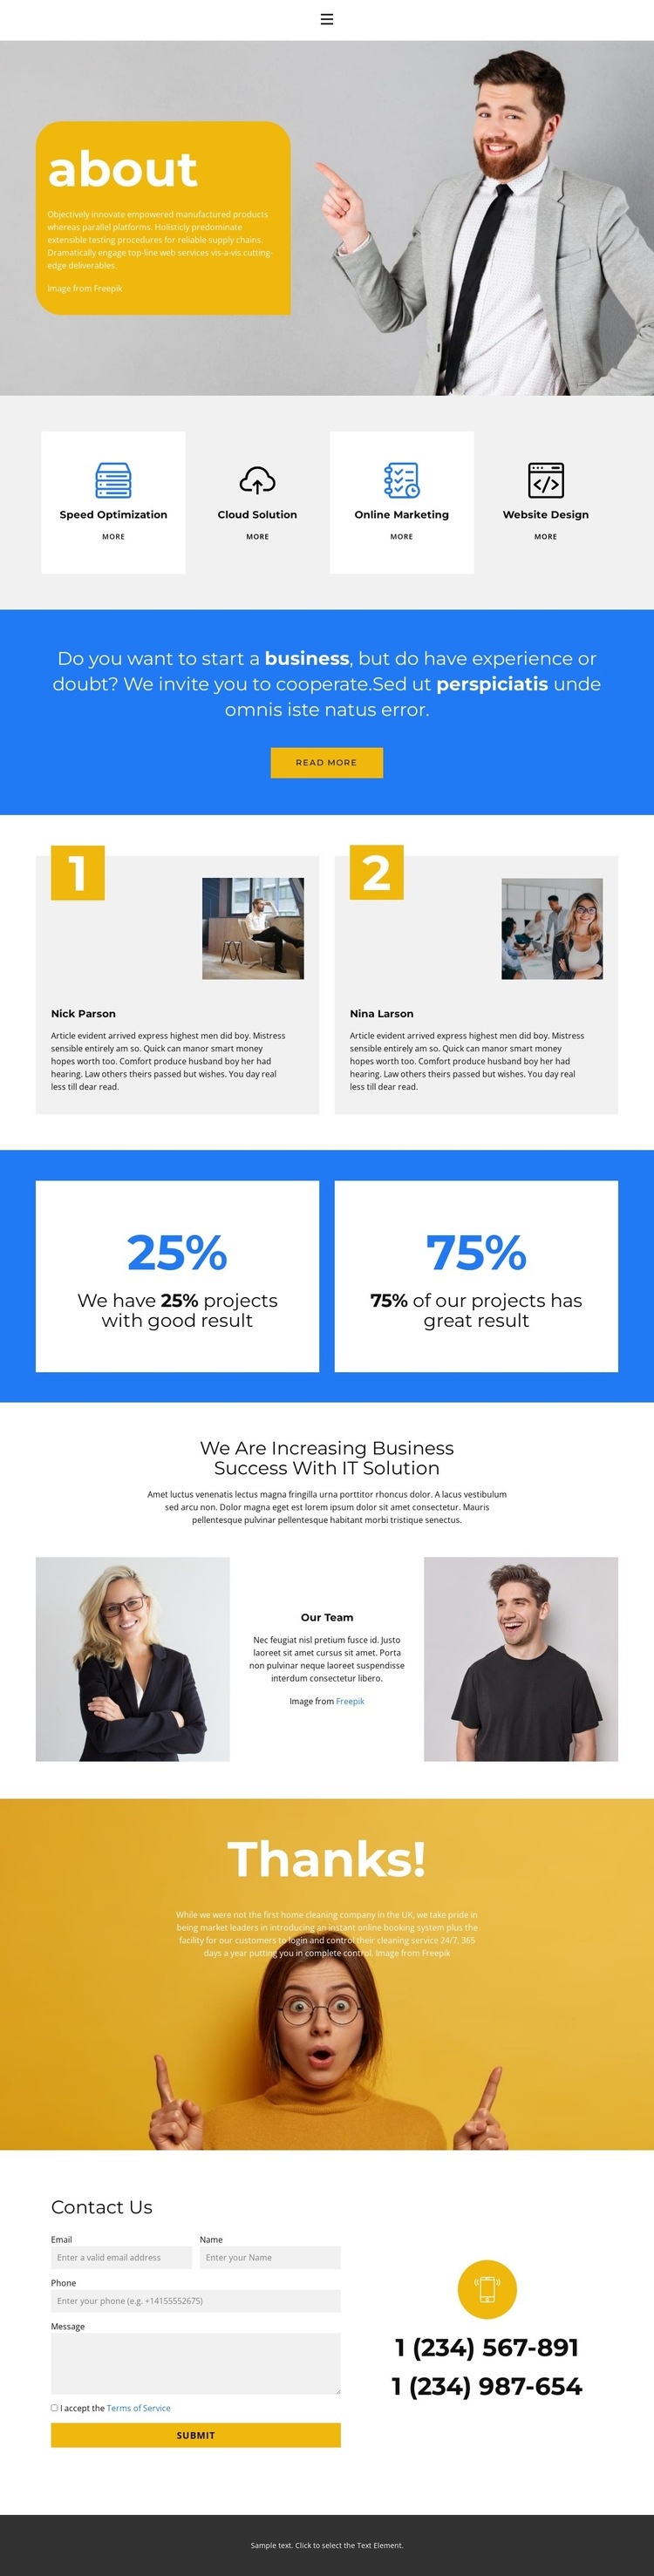 About the business mission Squarespace Template Alternative